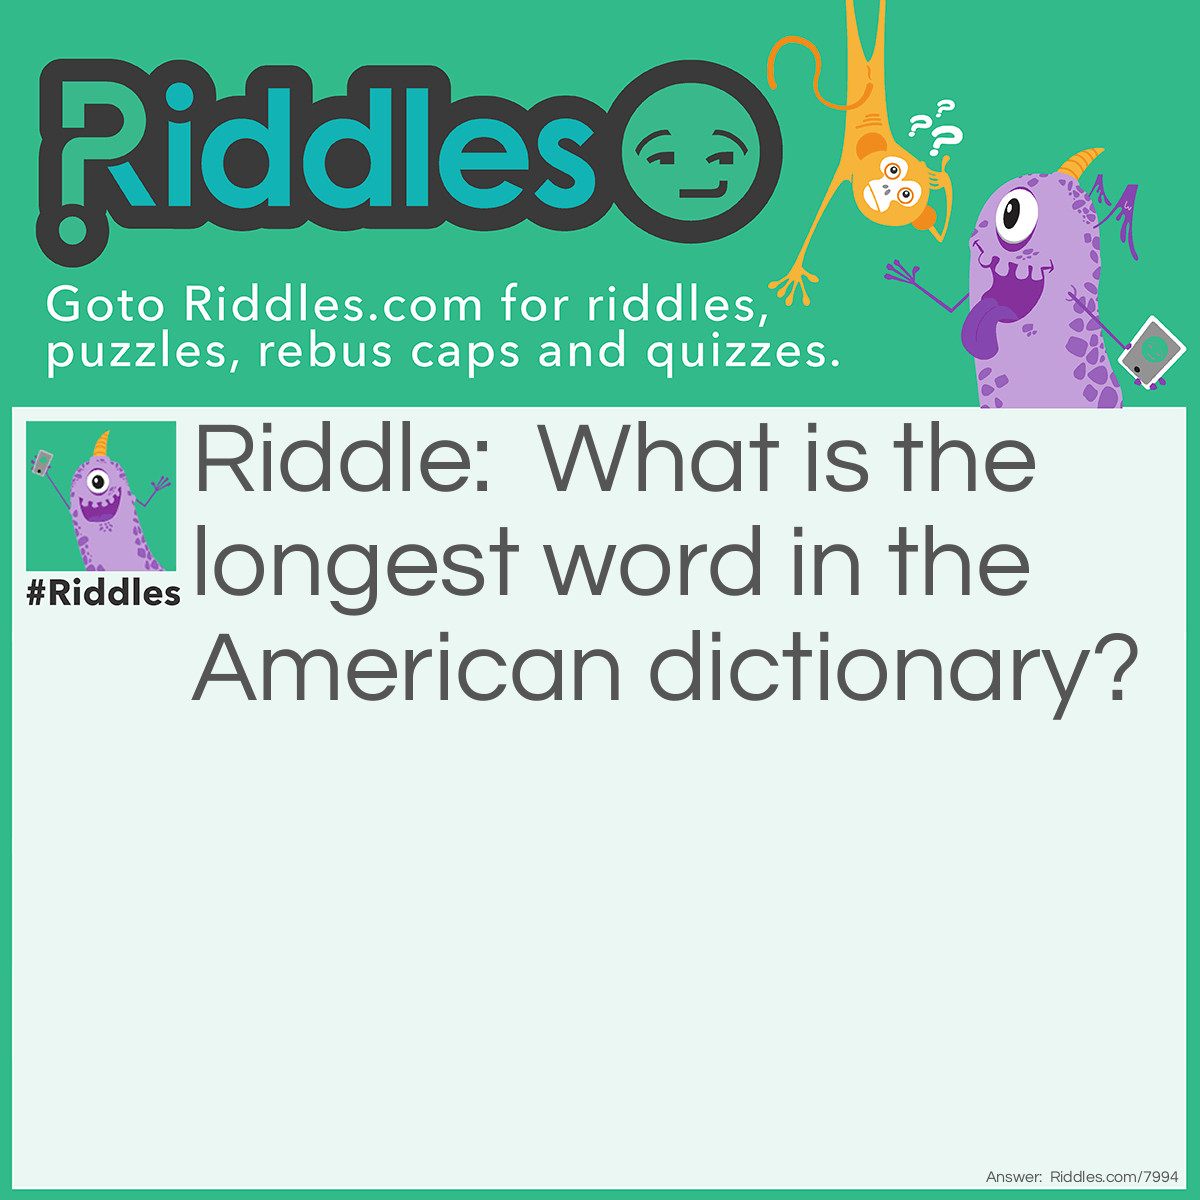 Riddle: What is the longest word in the American dictionary? Answer: Smiles, because there is a 'mile' between each 's'. S'mile's